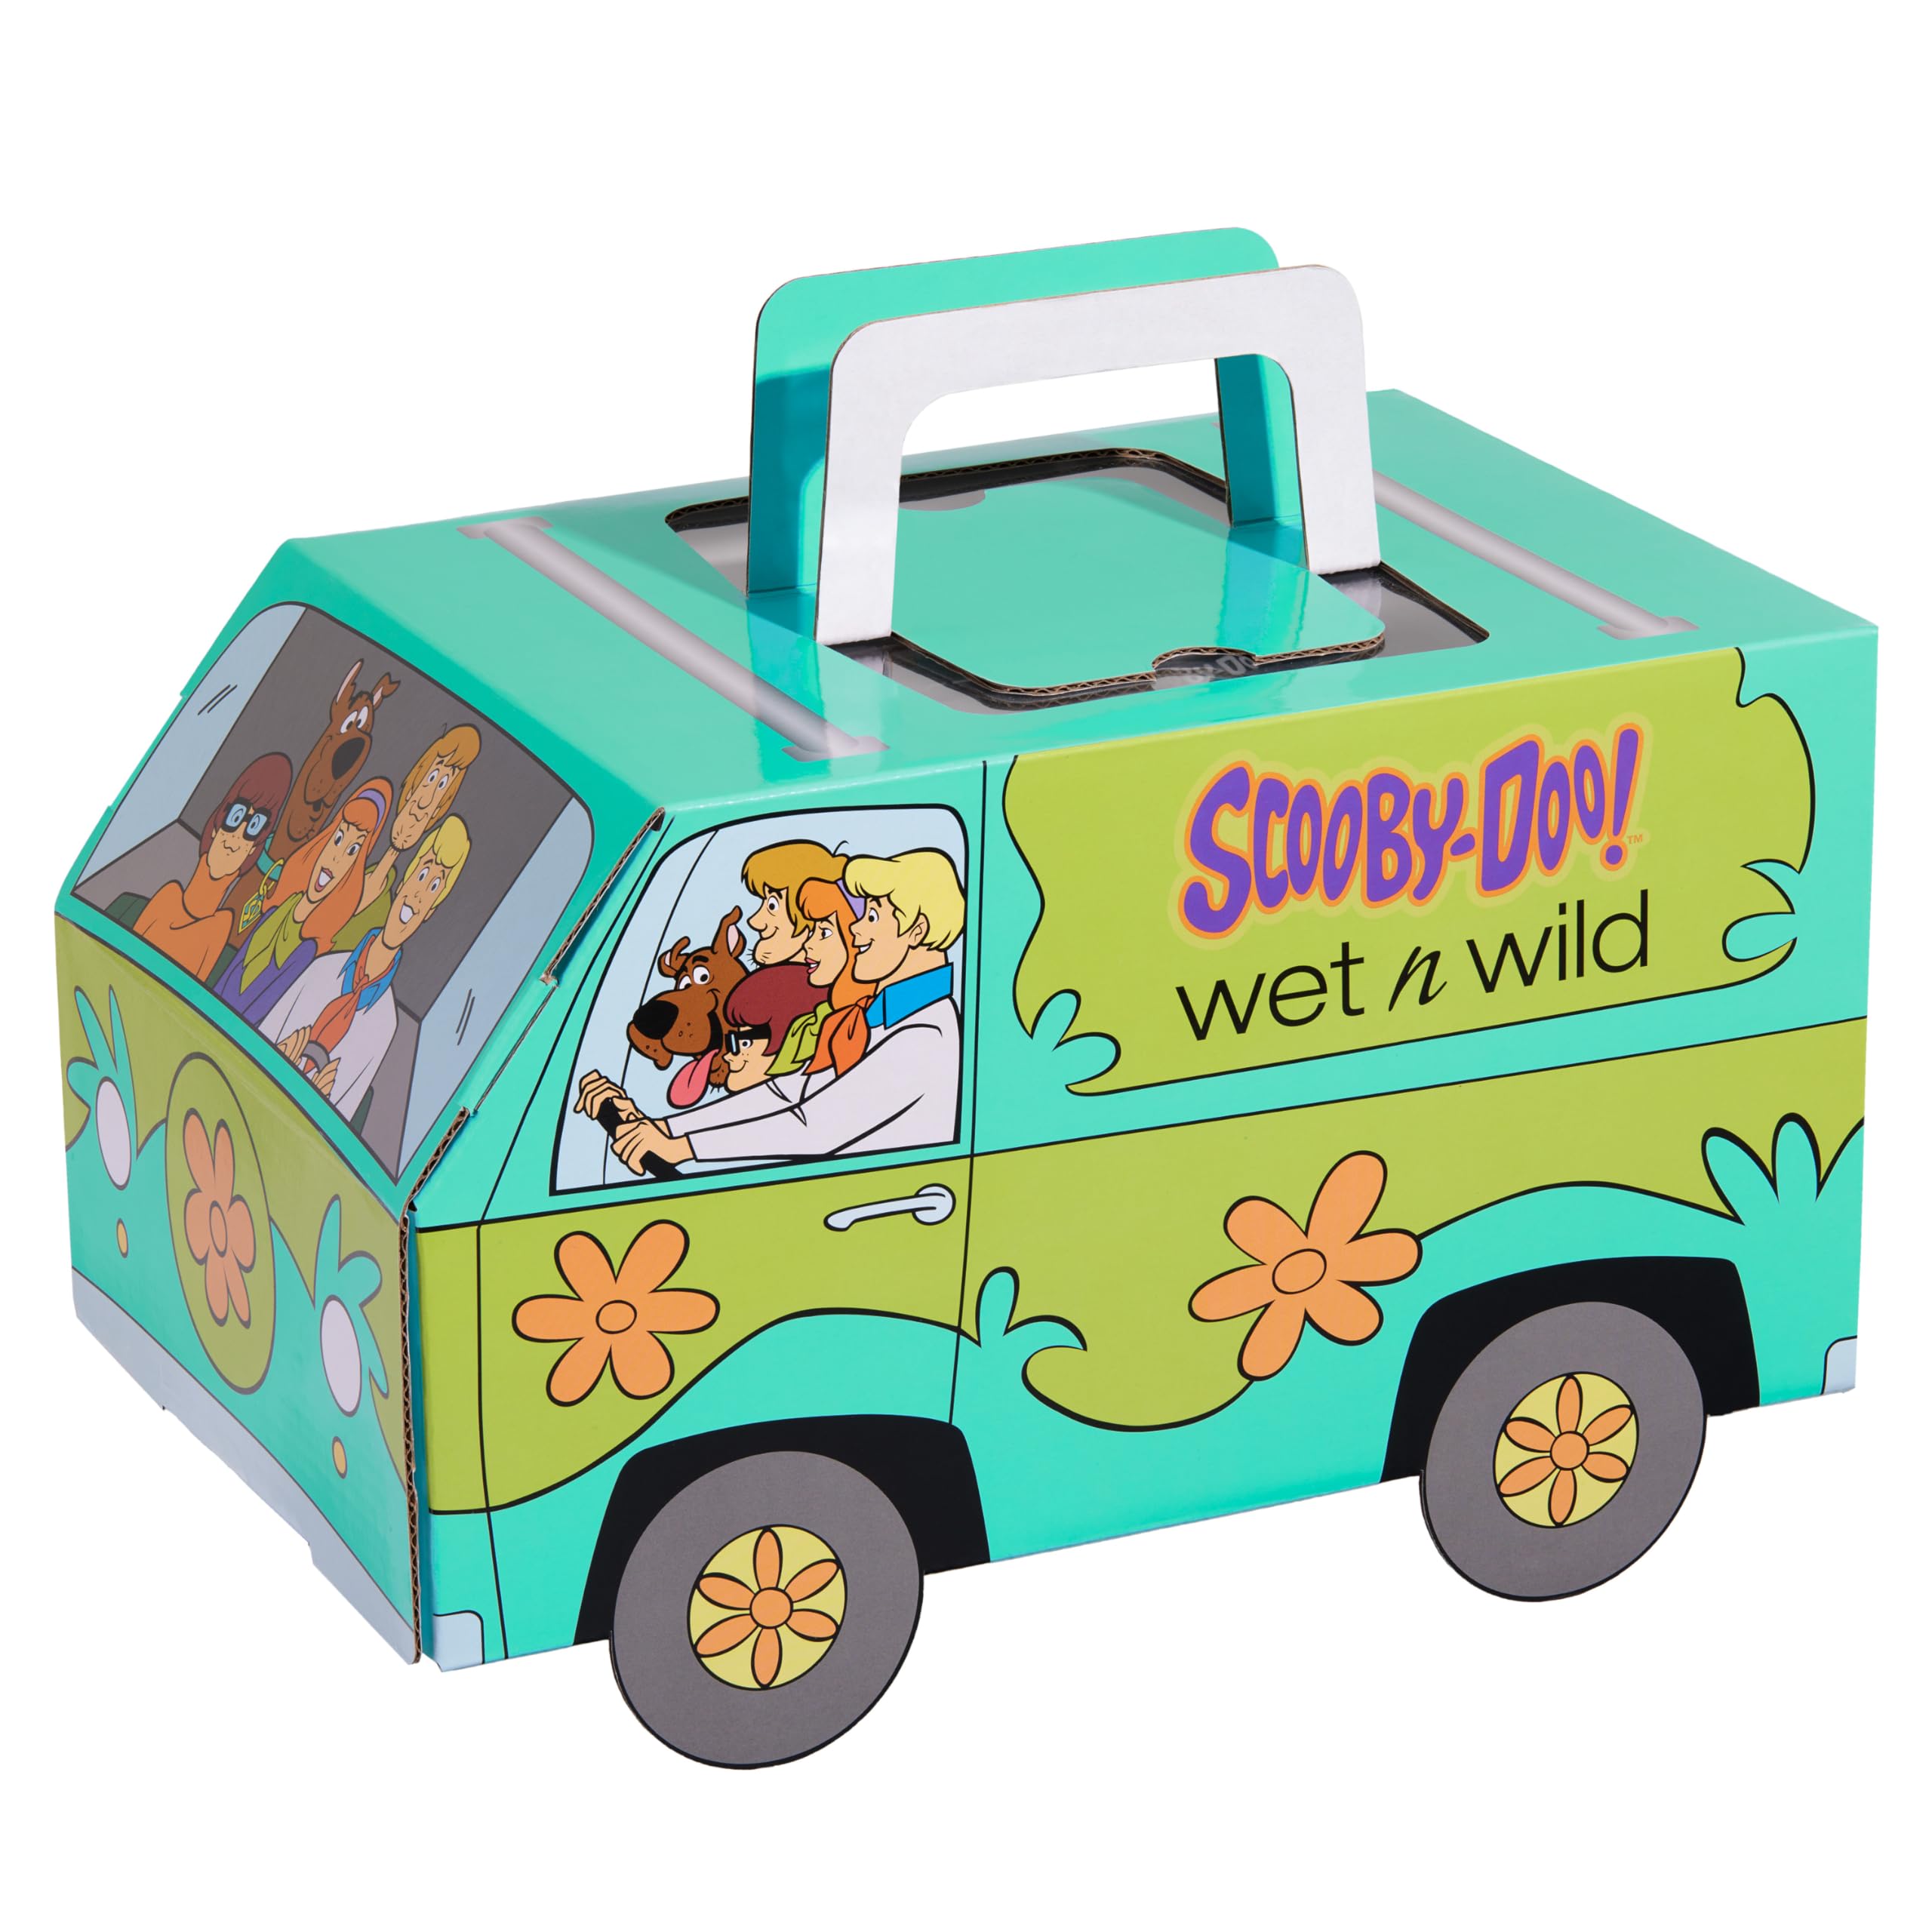 wet n wild Scooby Doo Limited Edition PR Box- Makeup Set with Brushes, and Palettes